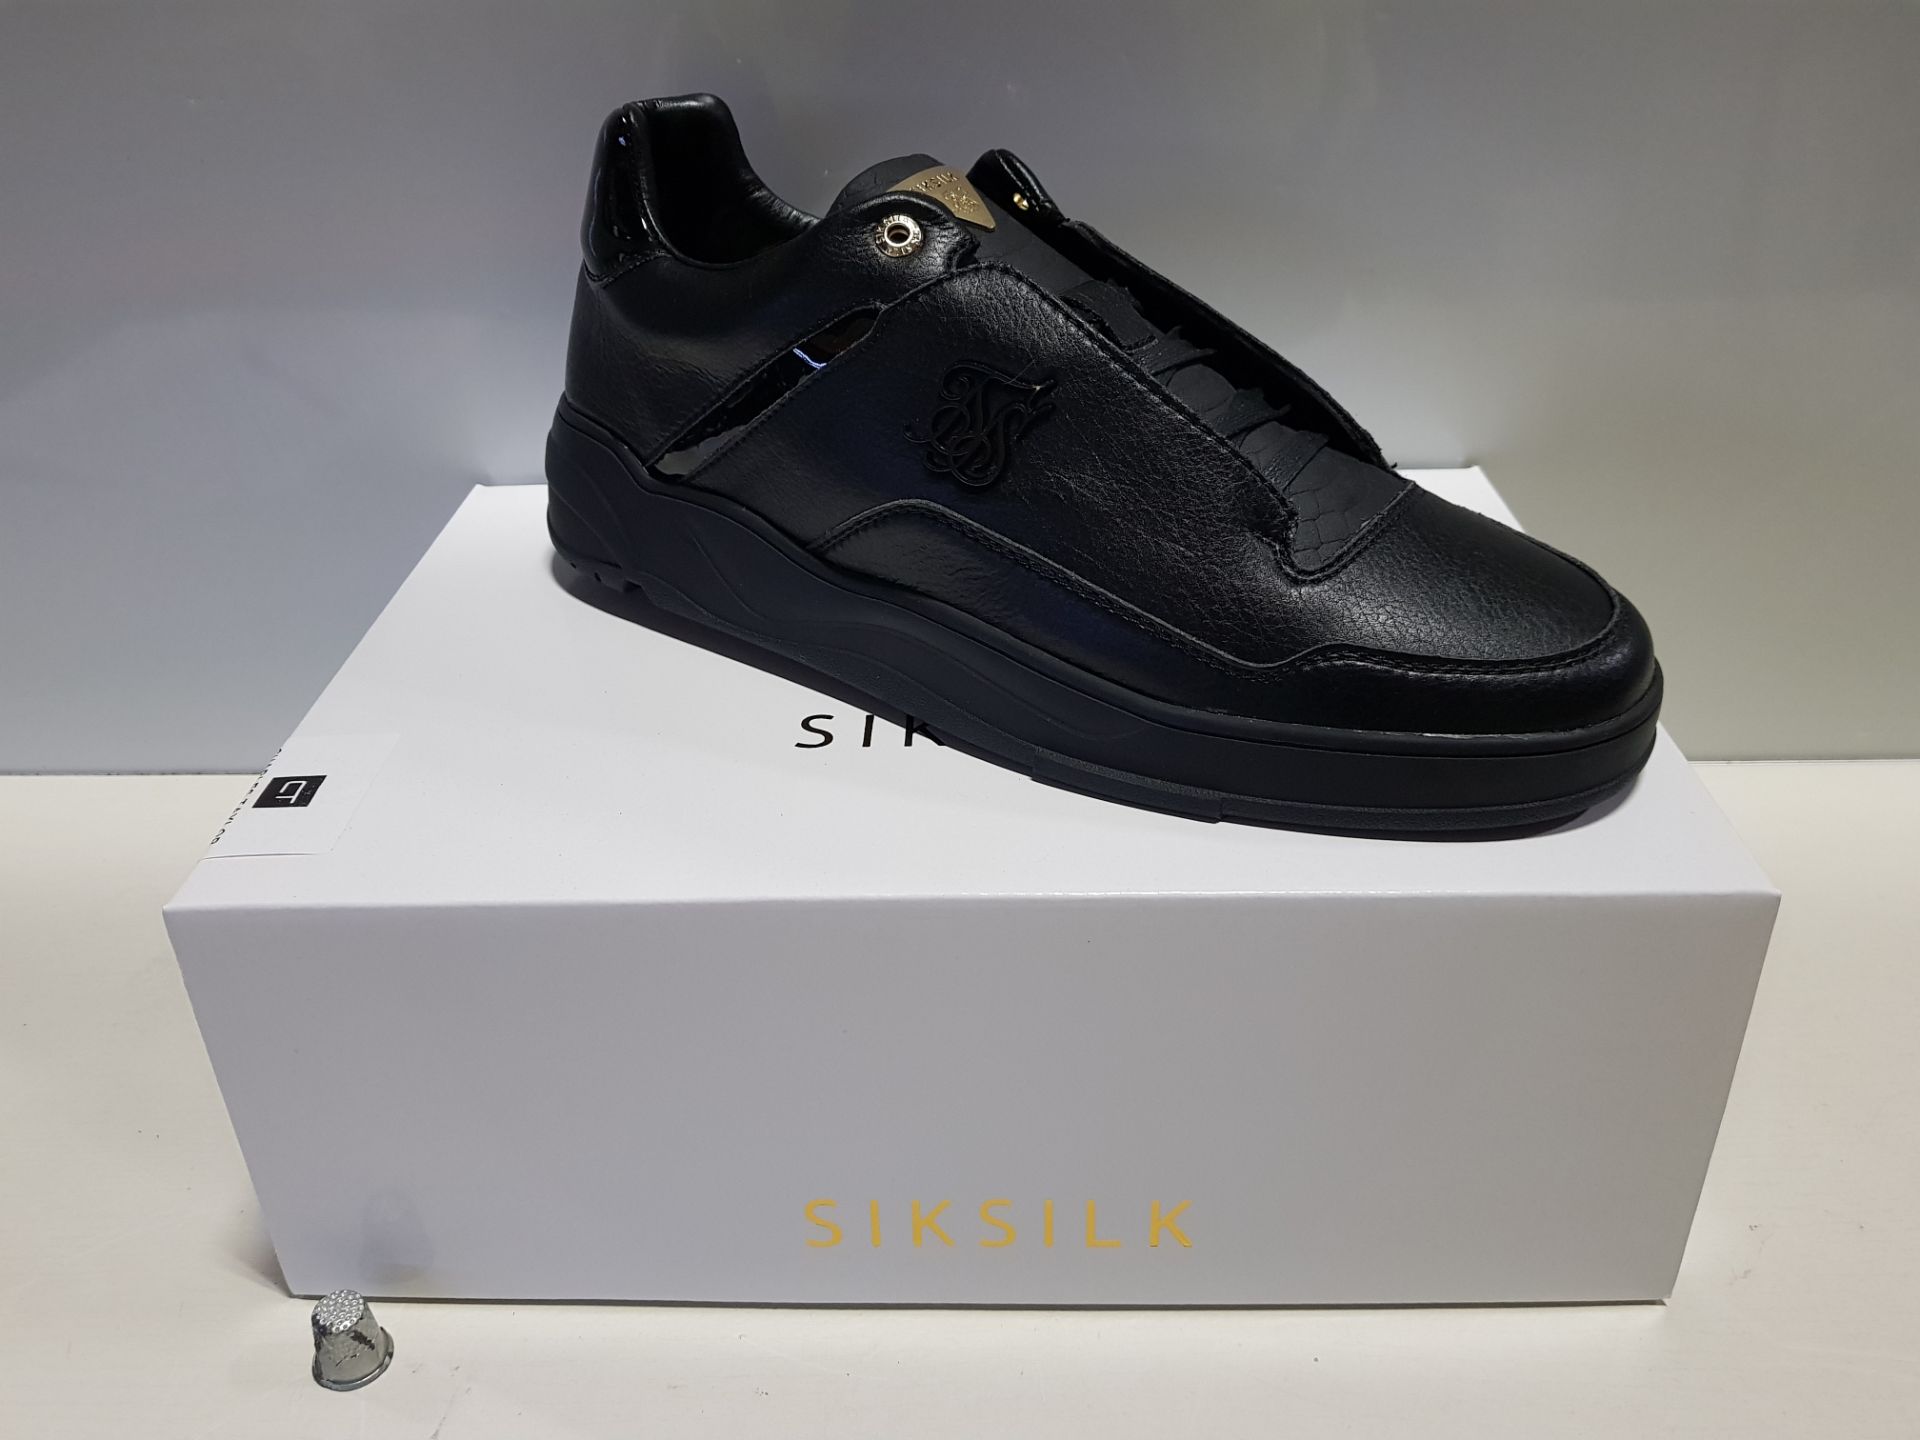 5 X BRAND NEW SIK SILK BLAZE LUX IN BLACK AND GOLD - IN SIZE UK 7 - ( SS-16120 )